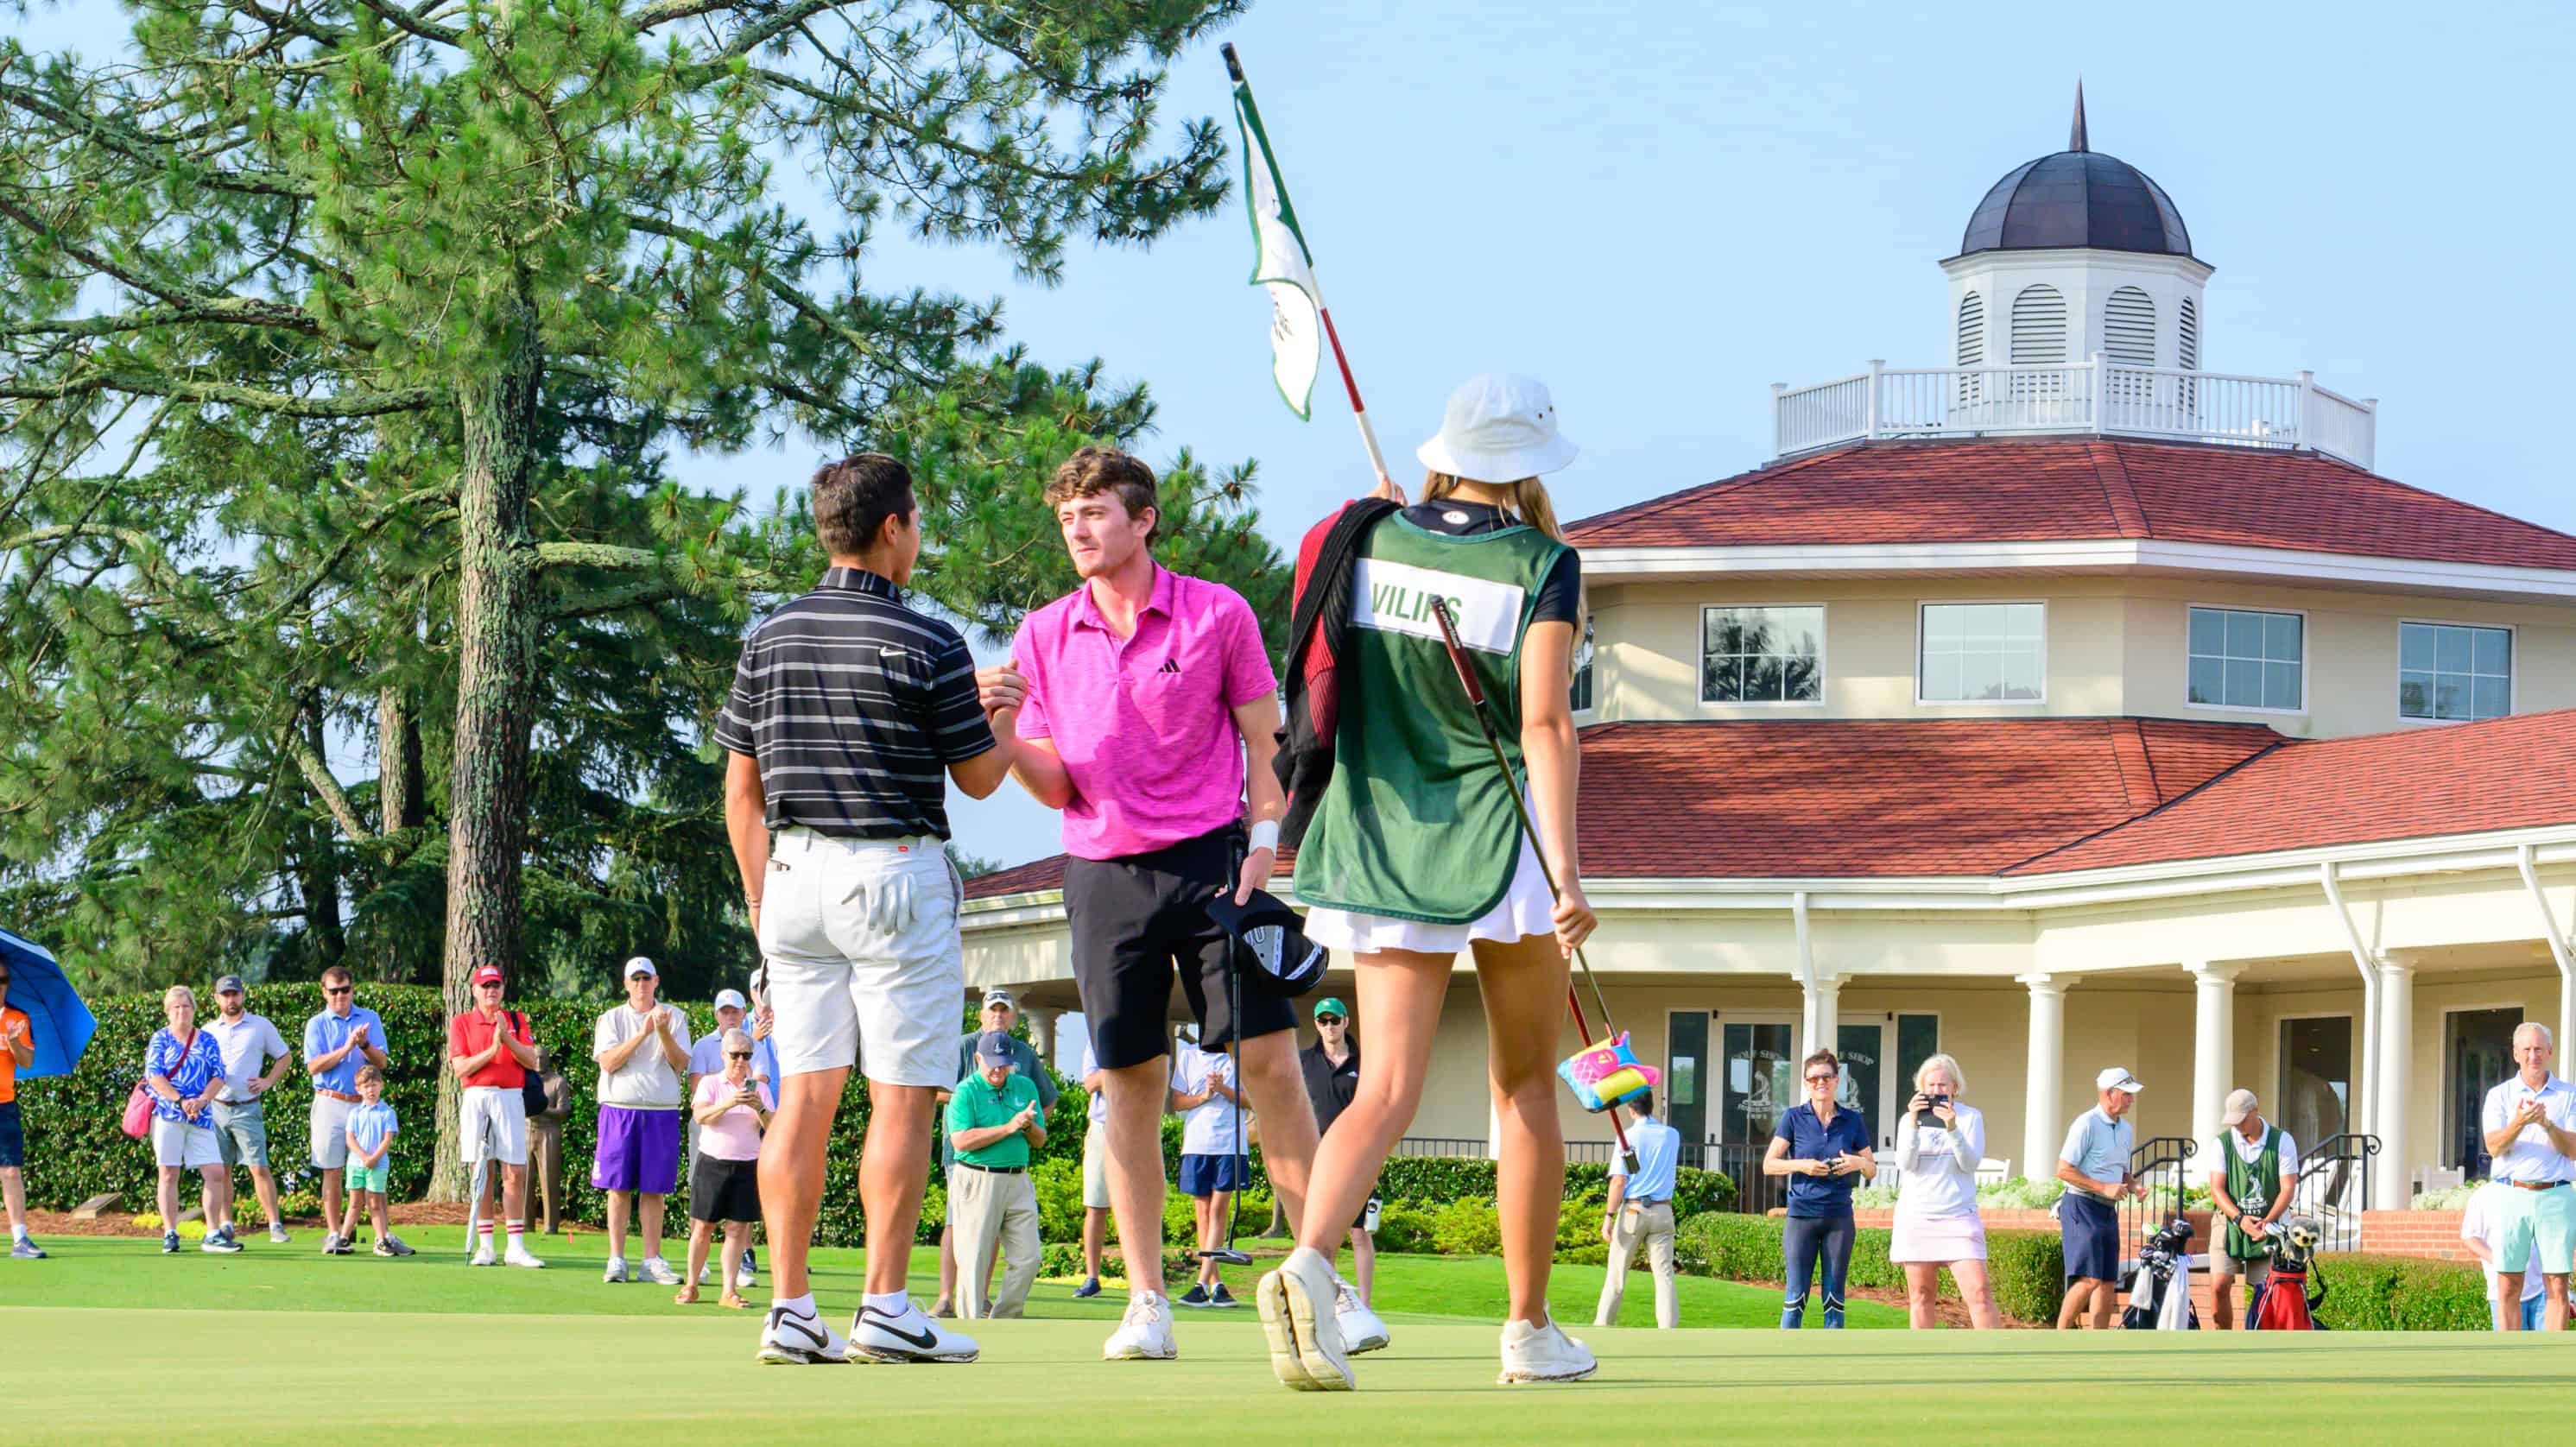 Nick Dunlap is congratulated by Karl Vilips on the 18th green of Pinehurst No. 2. (Photo by John Patota)